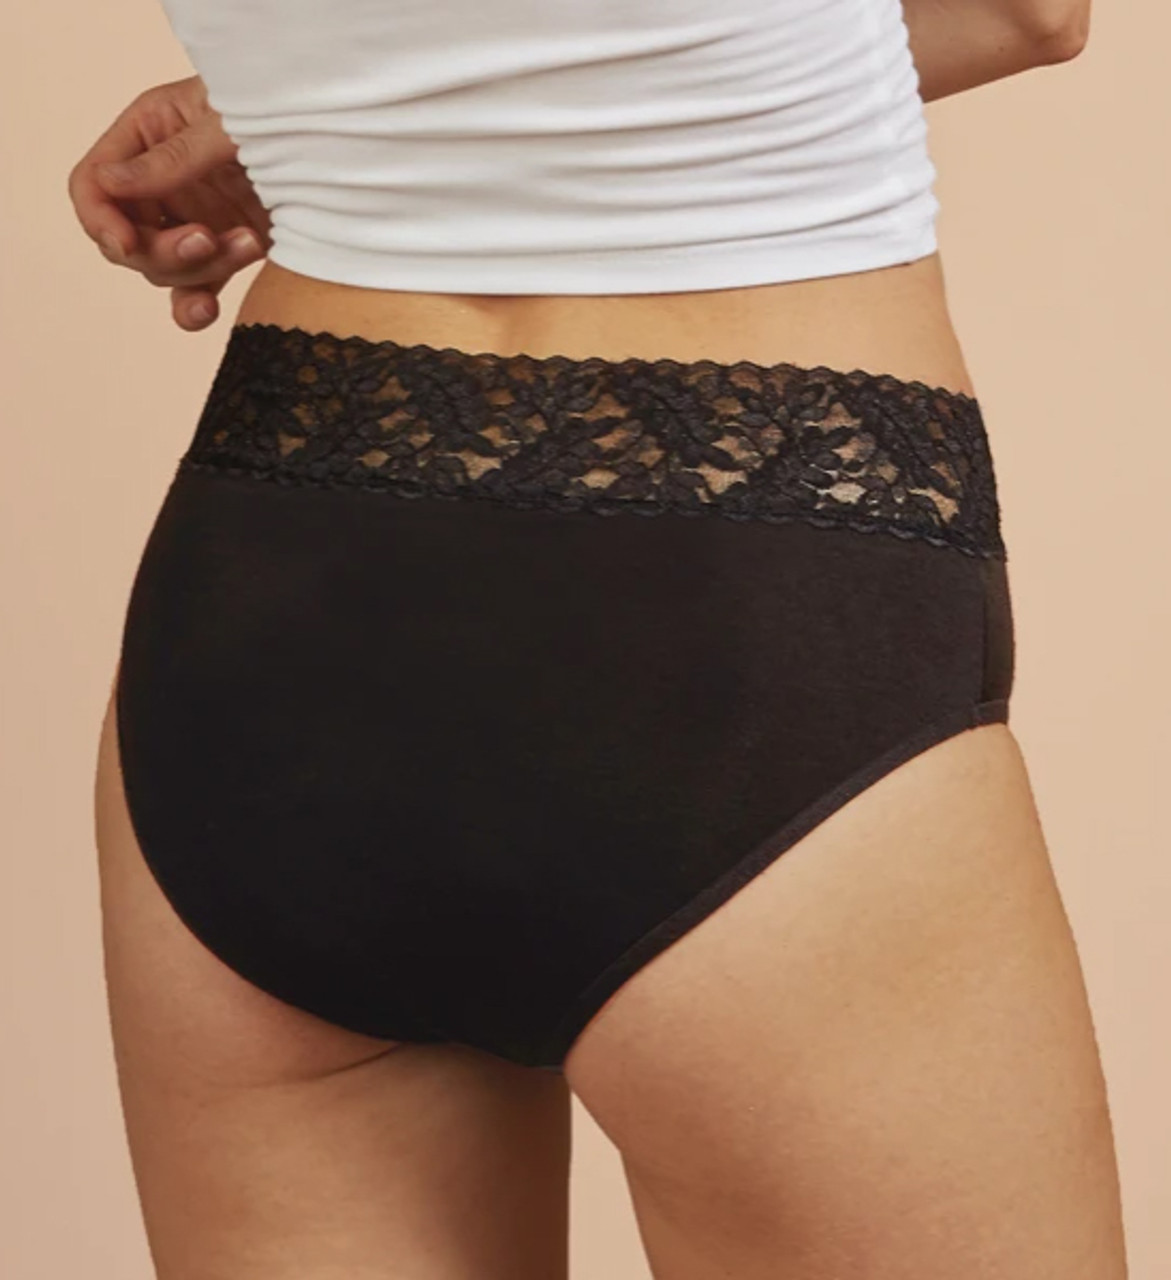 FLUX UNDIES REVIEW  thoughts on period underwear ad  Vegan Beauty Girl